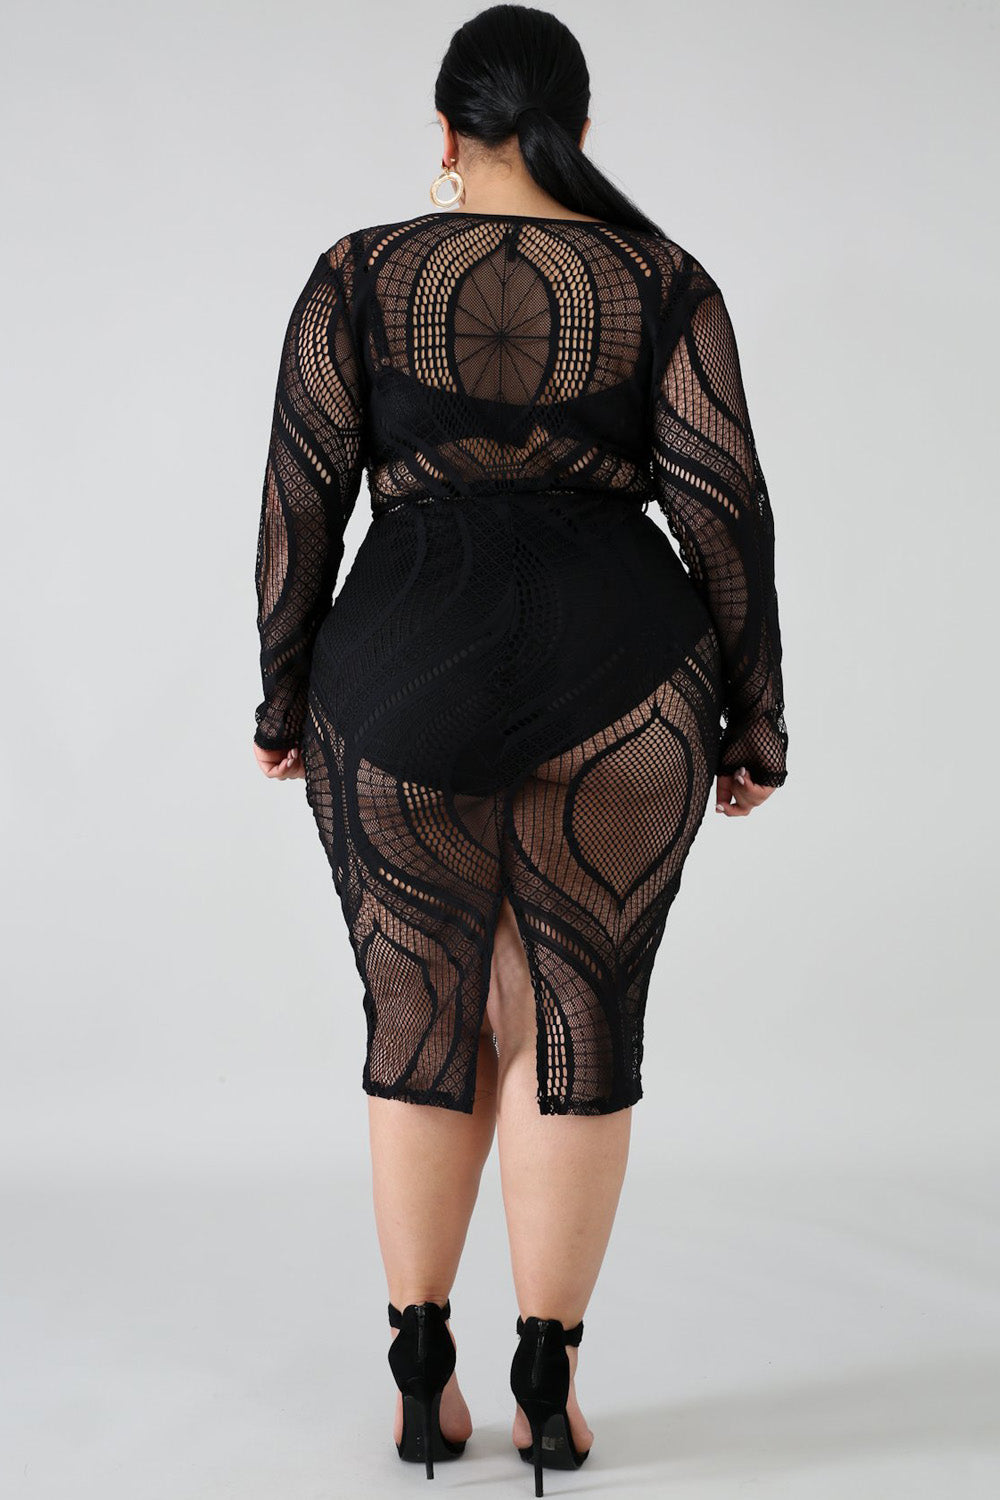 goPals sexy off the shoulder black plus size sheer lace dress. 